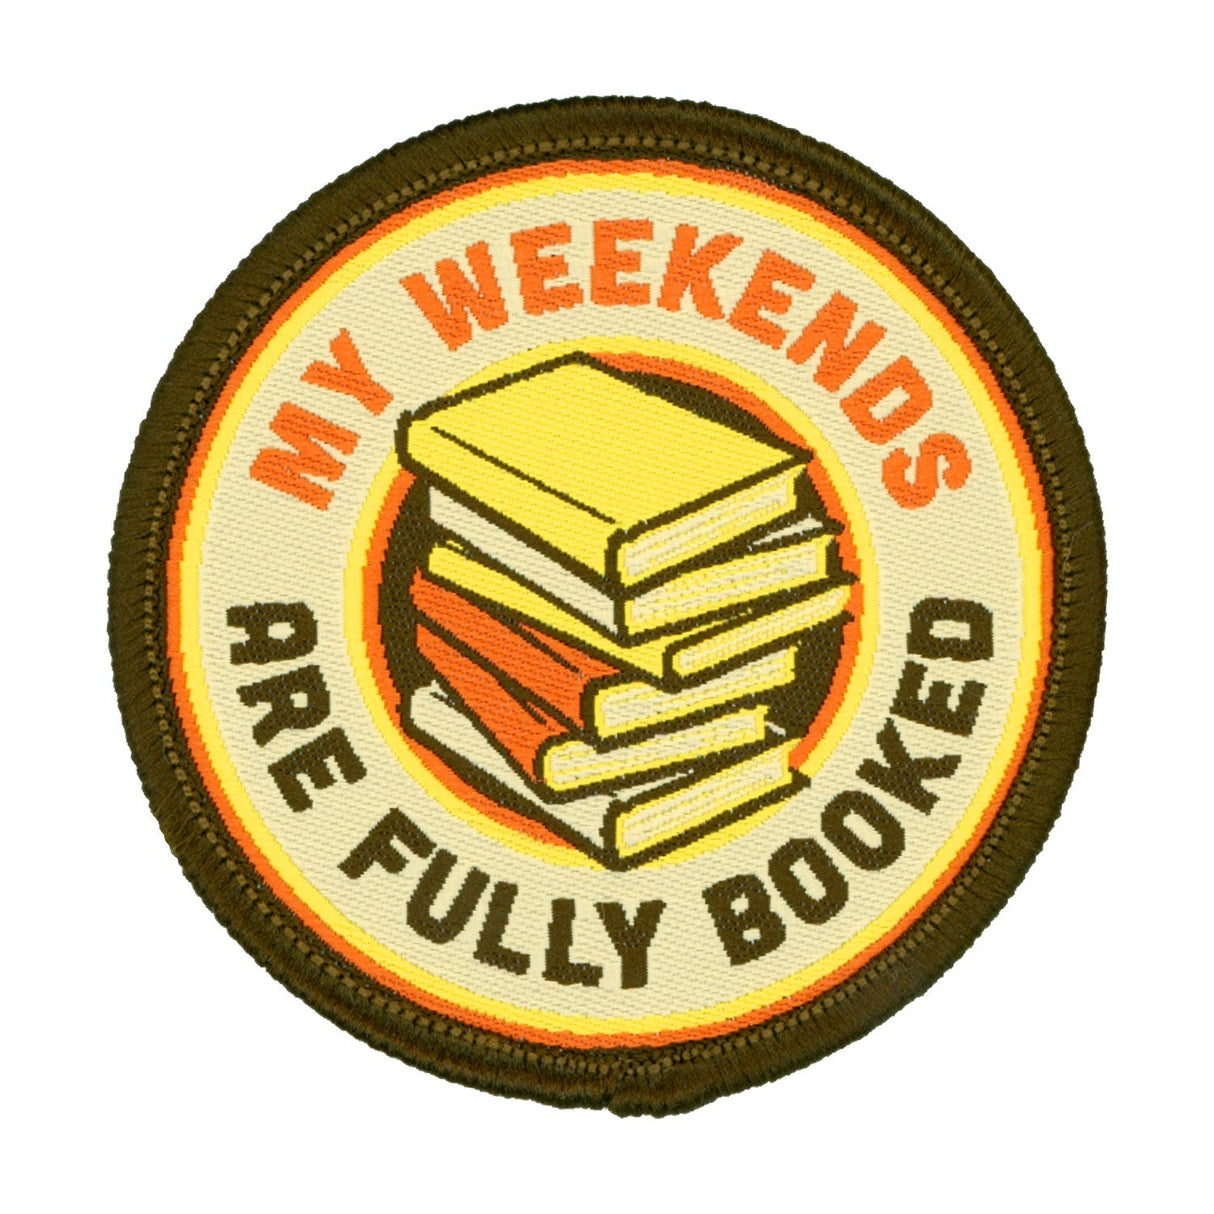 My Weekends are Fully Booked Patch